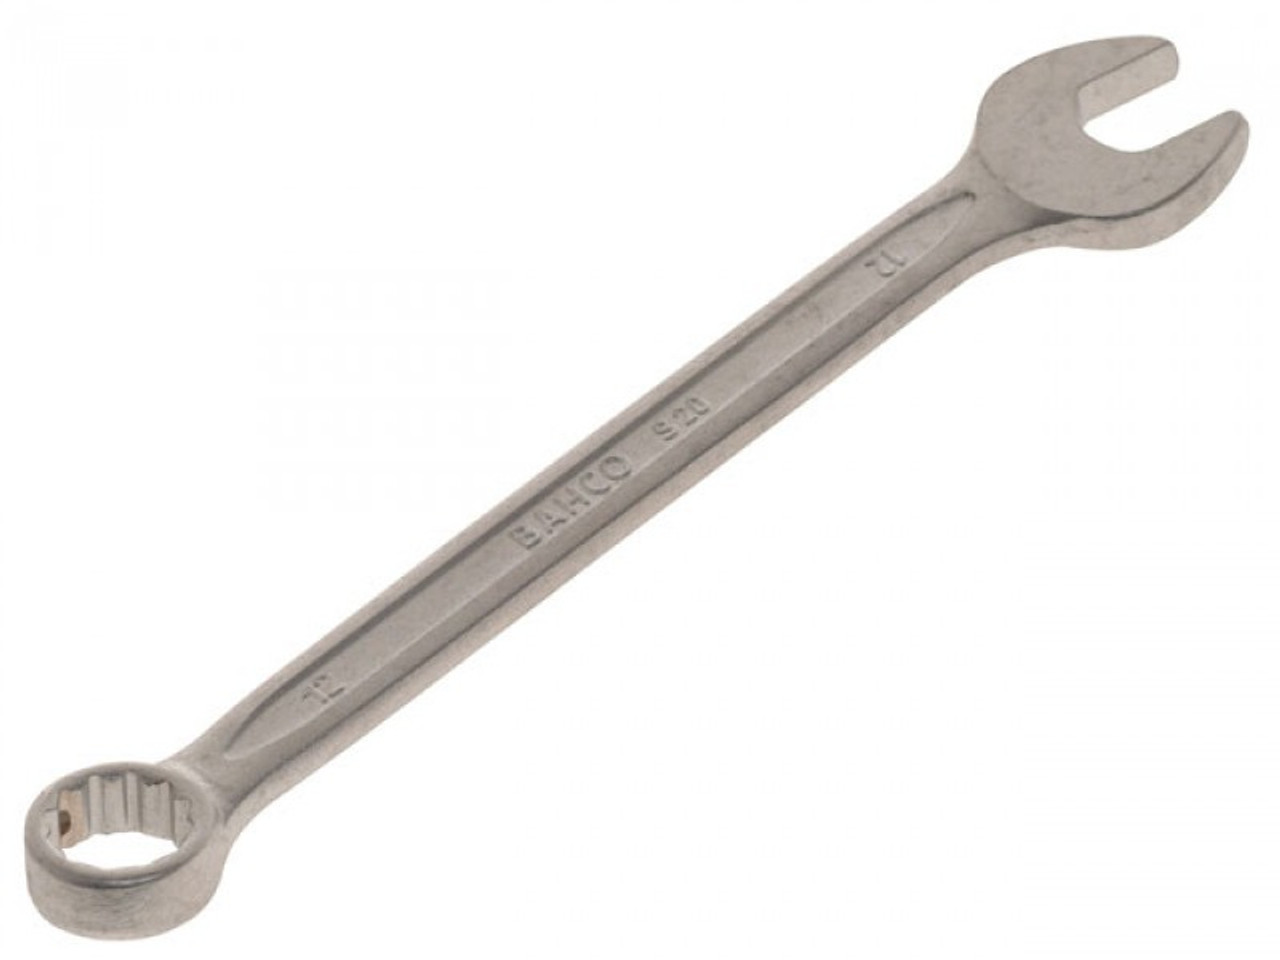 IMPA 616143 WRENCH OPEN & 12-POINT BOX BAHCO PU20 20MM